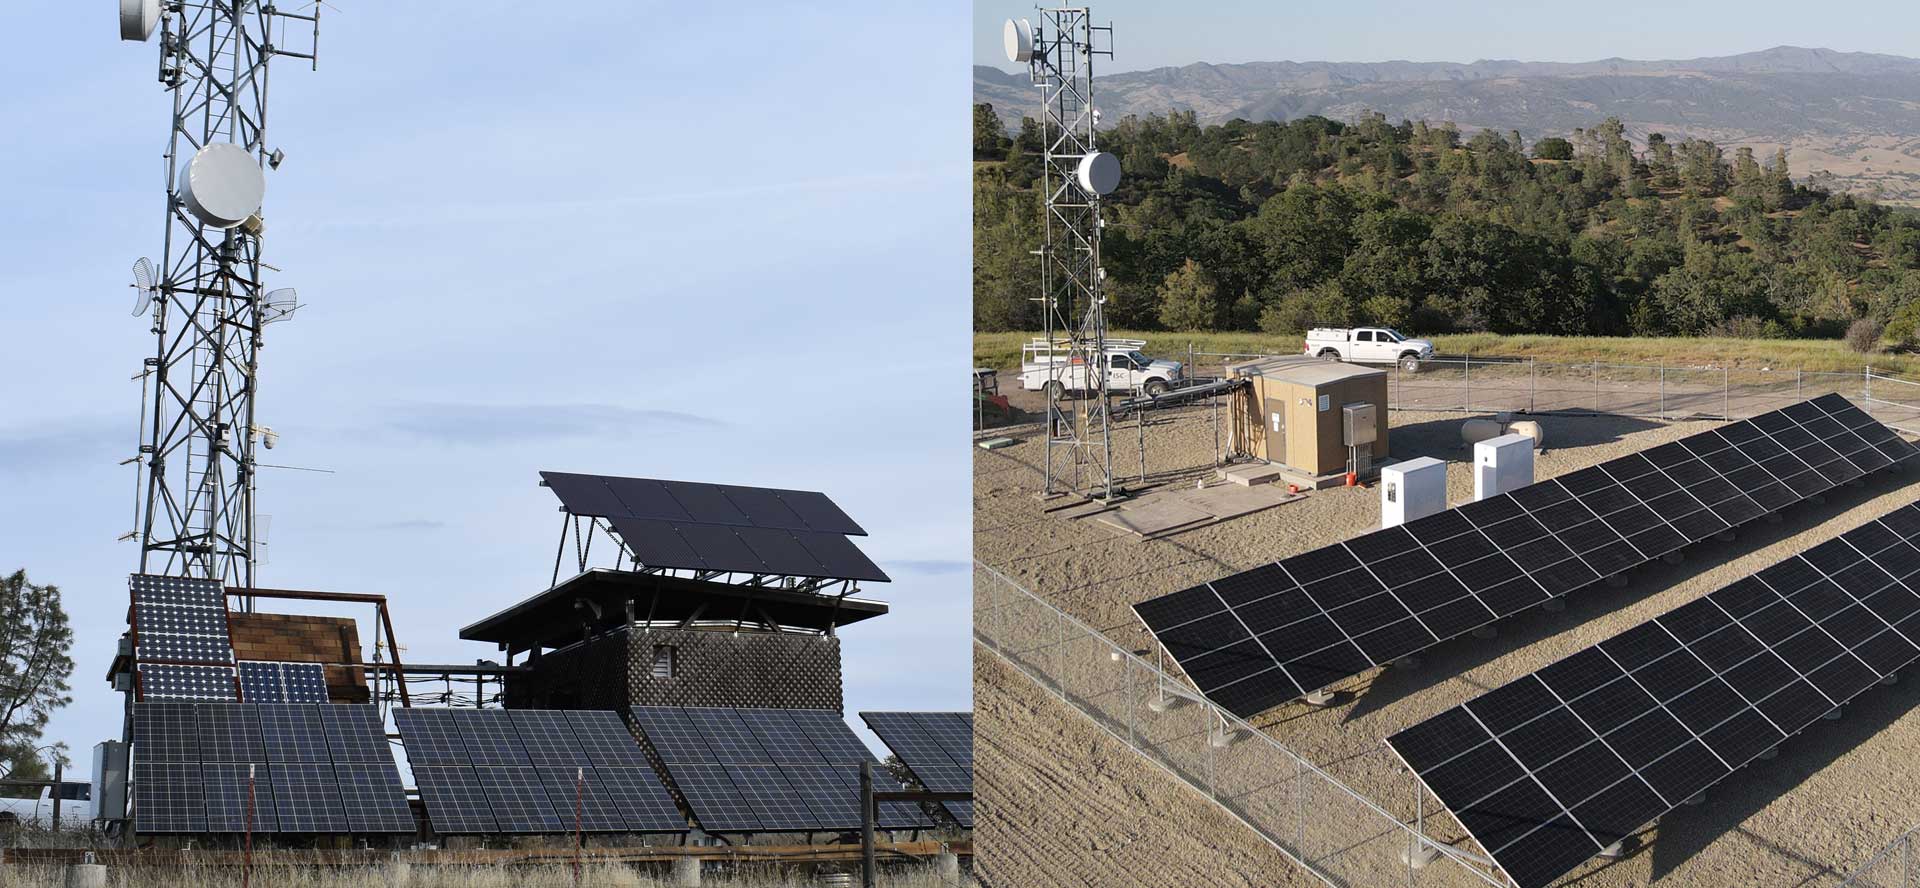 Solar power for network communications before and after rehabilitation